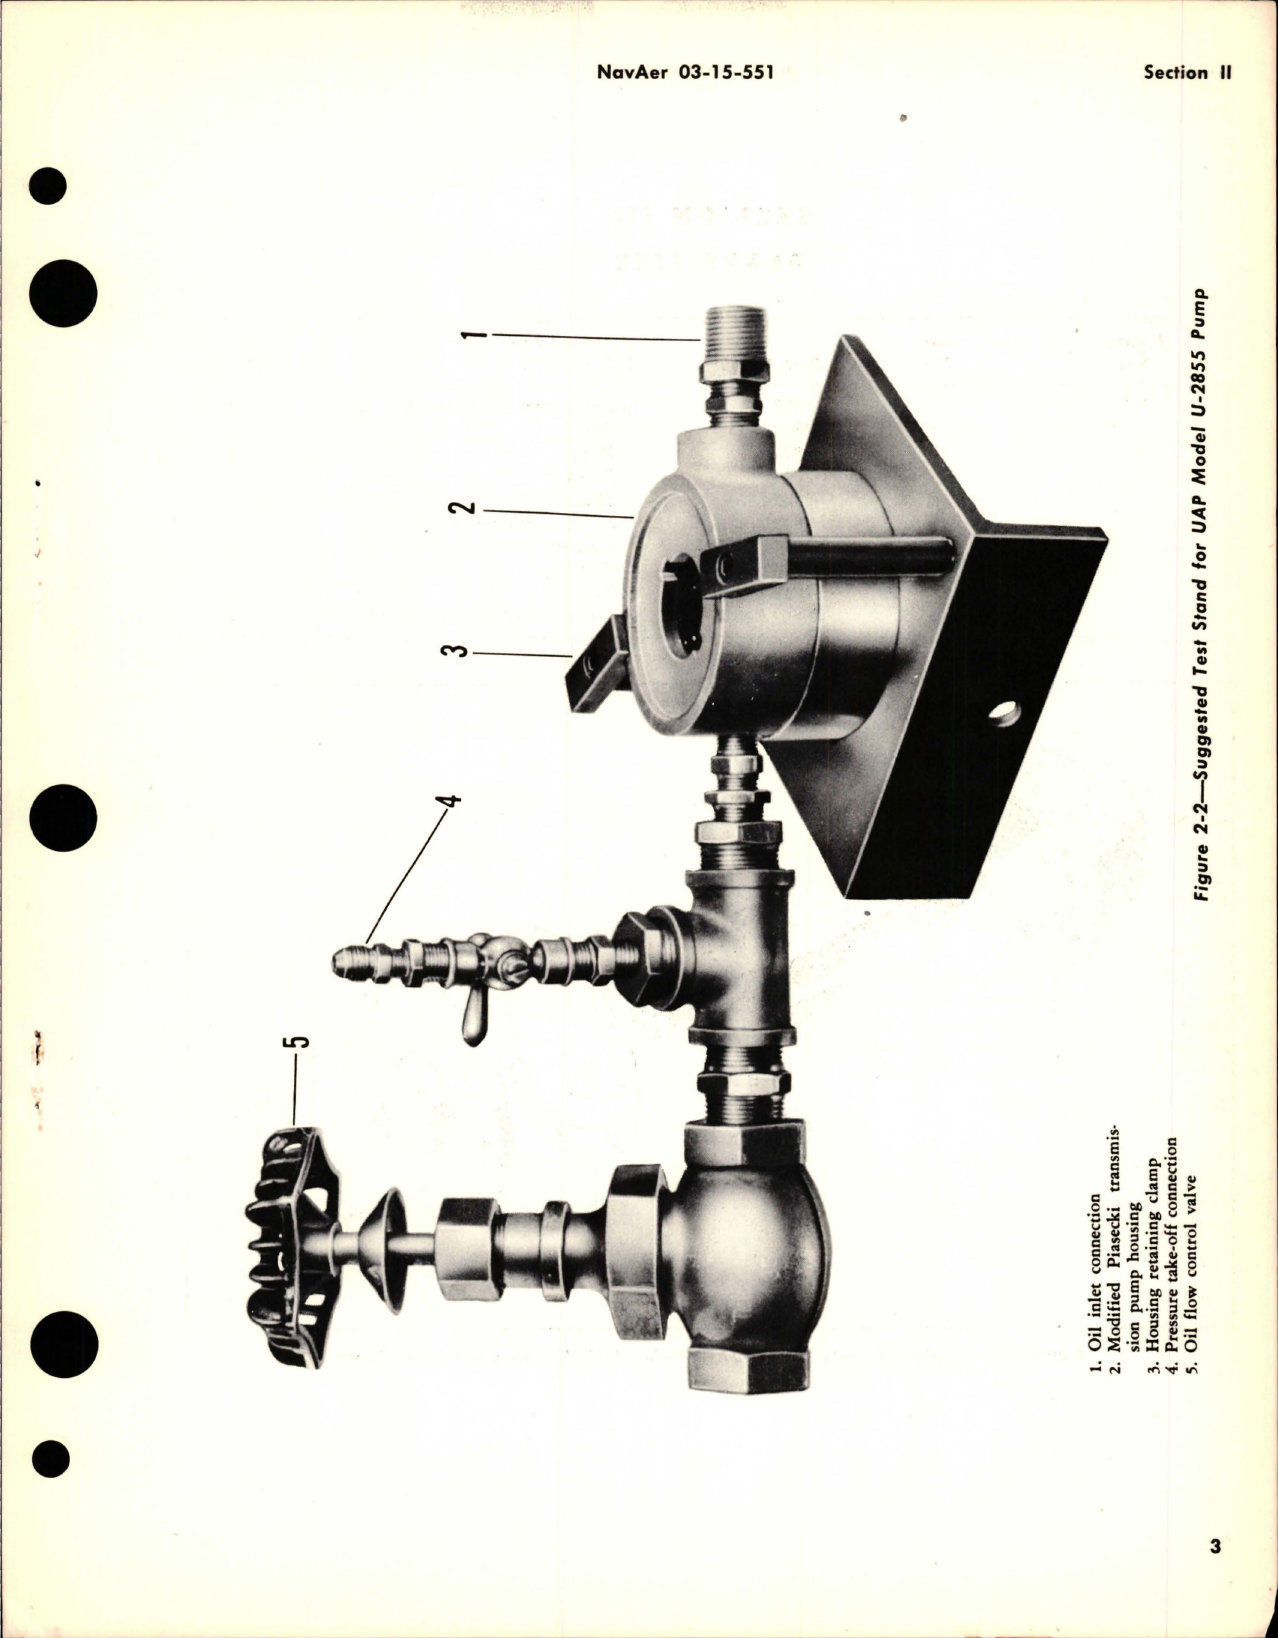 Sample page 5 from AirCorps Library document: Operation, Service, Overhaul Instructions with Parts Catalog for Oil Transmission Pump - Part U-2855 